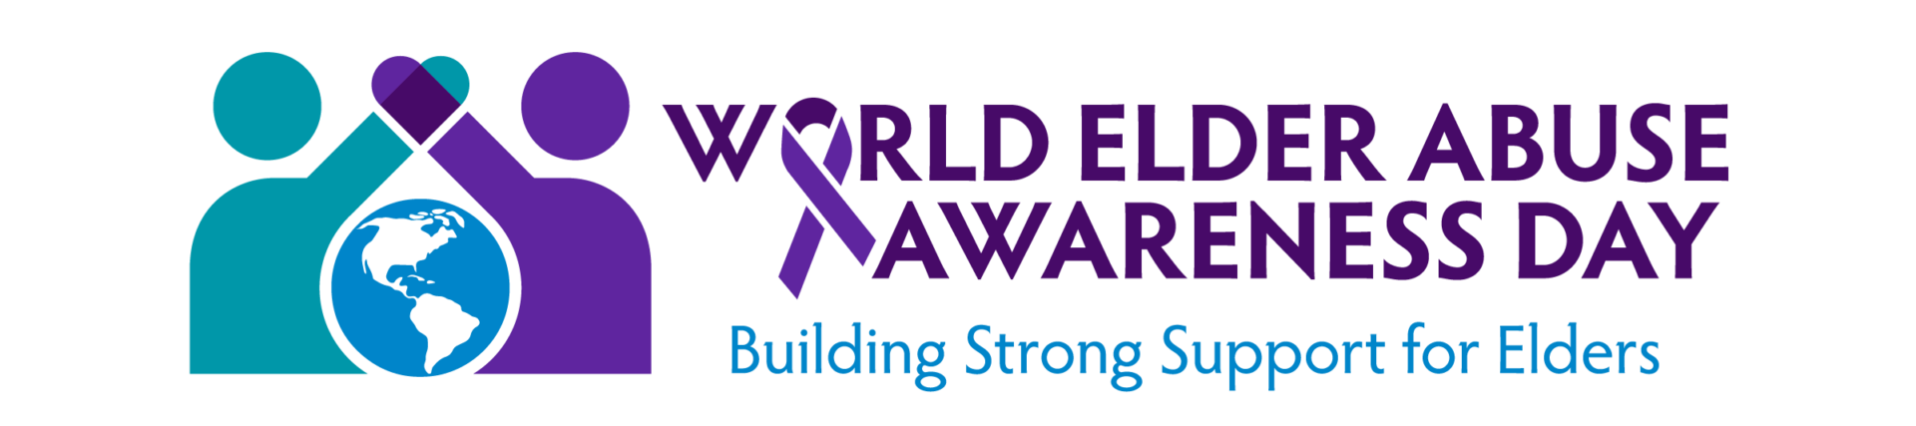 WEAAD Logo with slogan "Building Strong Supports for Elders